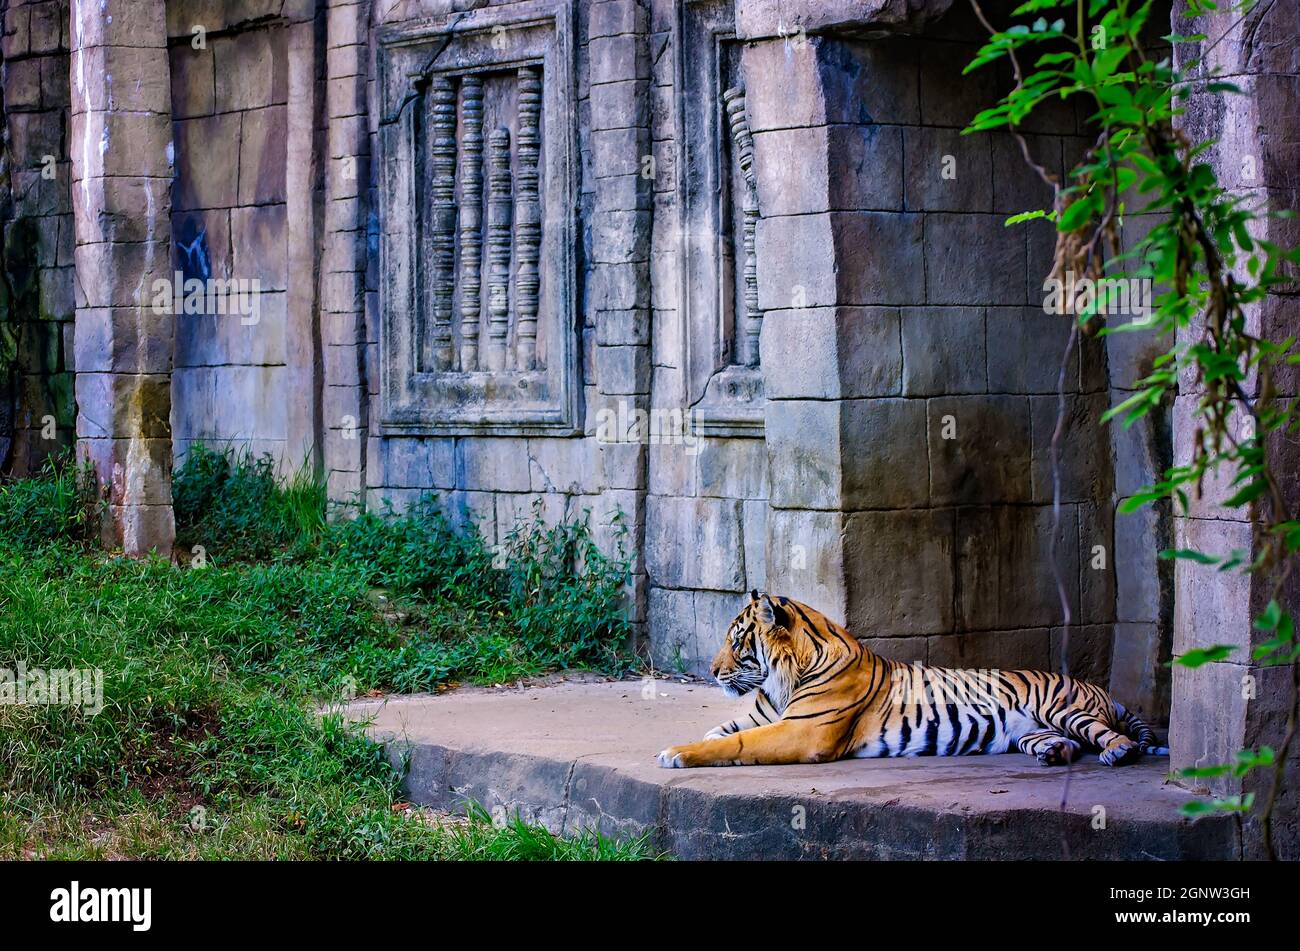 A Sumatran tiger (Panthera tigris sumatrae) rests in an enclosure designed to mimic an Egyptian temple at the Memphis Zoo in Memphis, Tennessee. Stock Photo